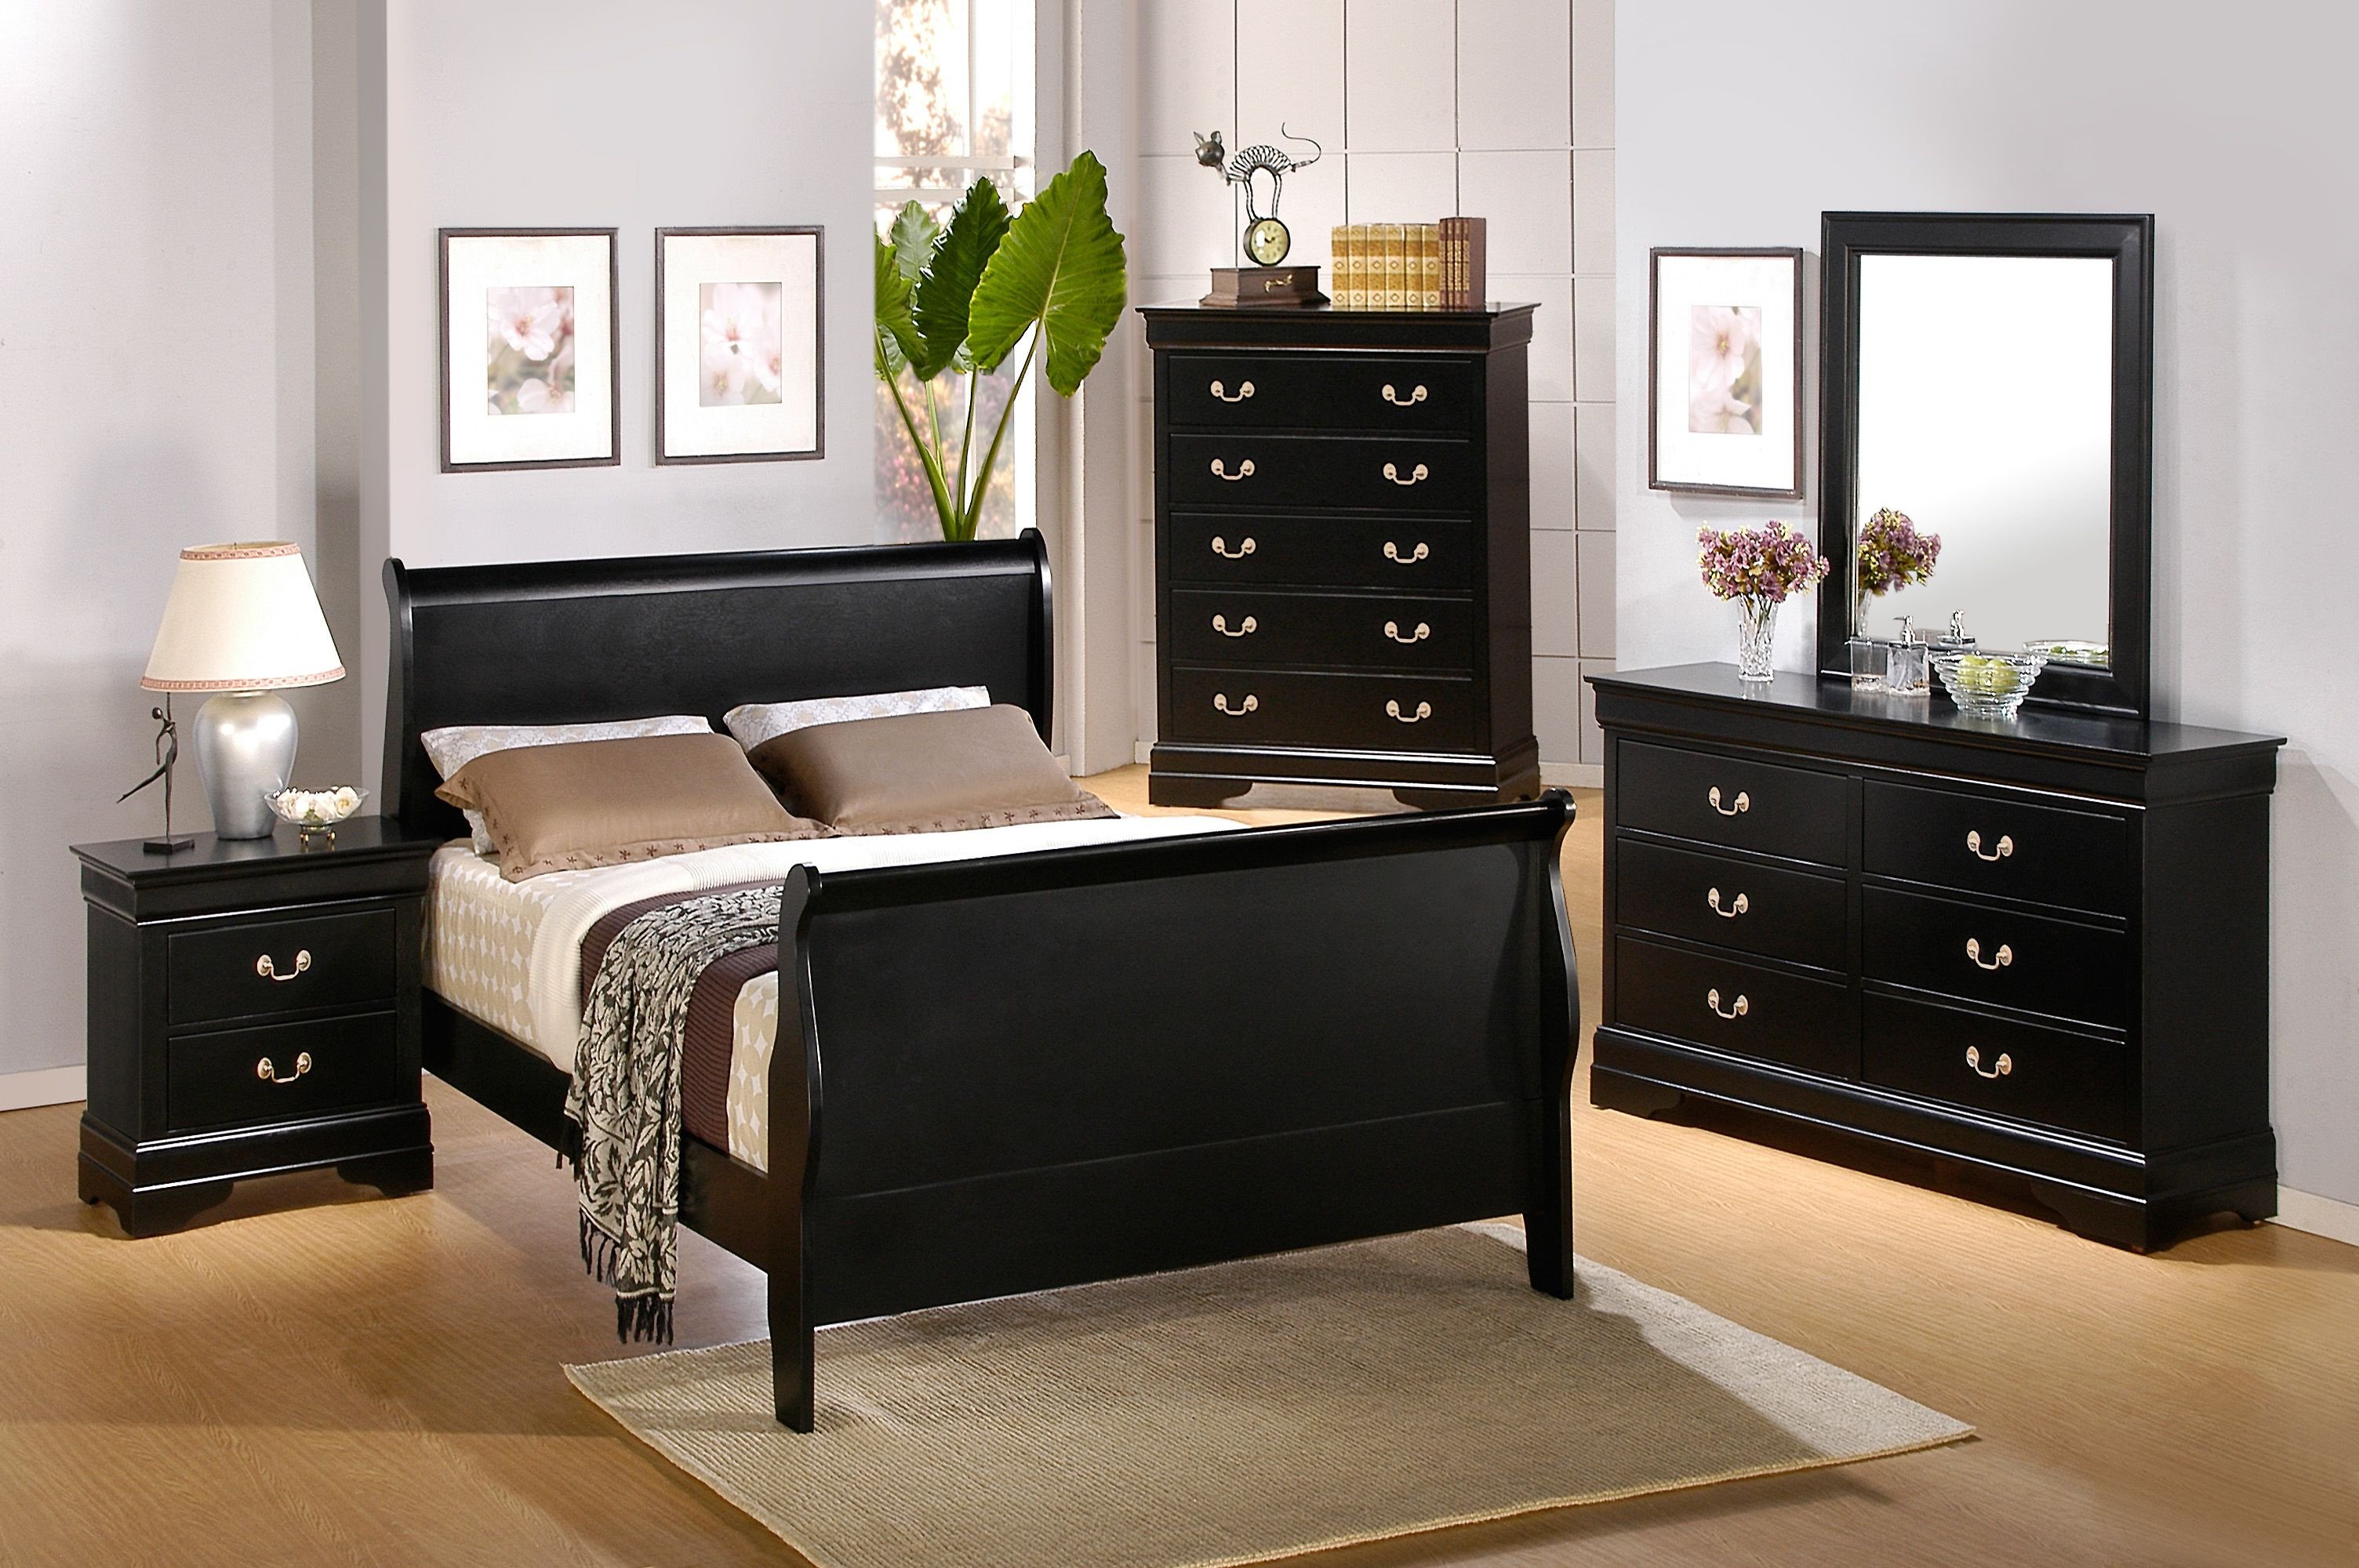 Best Quality Bedroom Furniture Lovely Bedroom Mirror Matching Pieces Also Available Mr